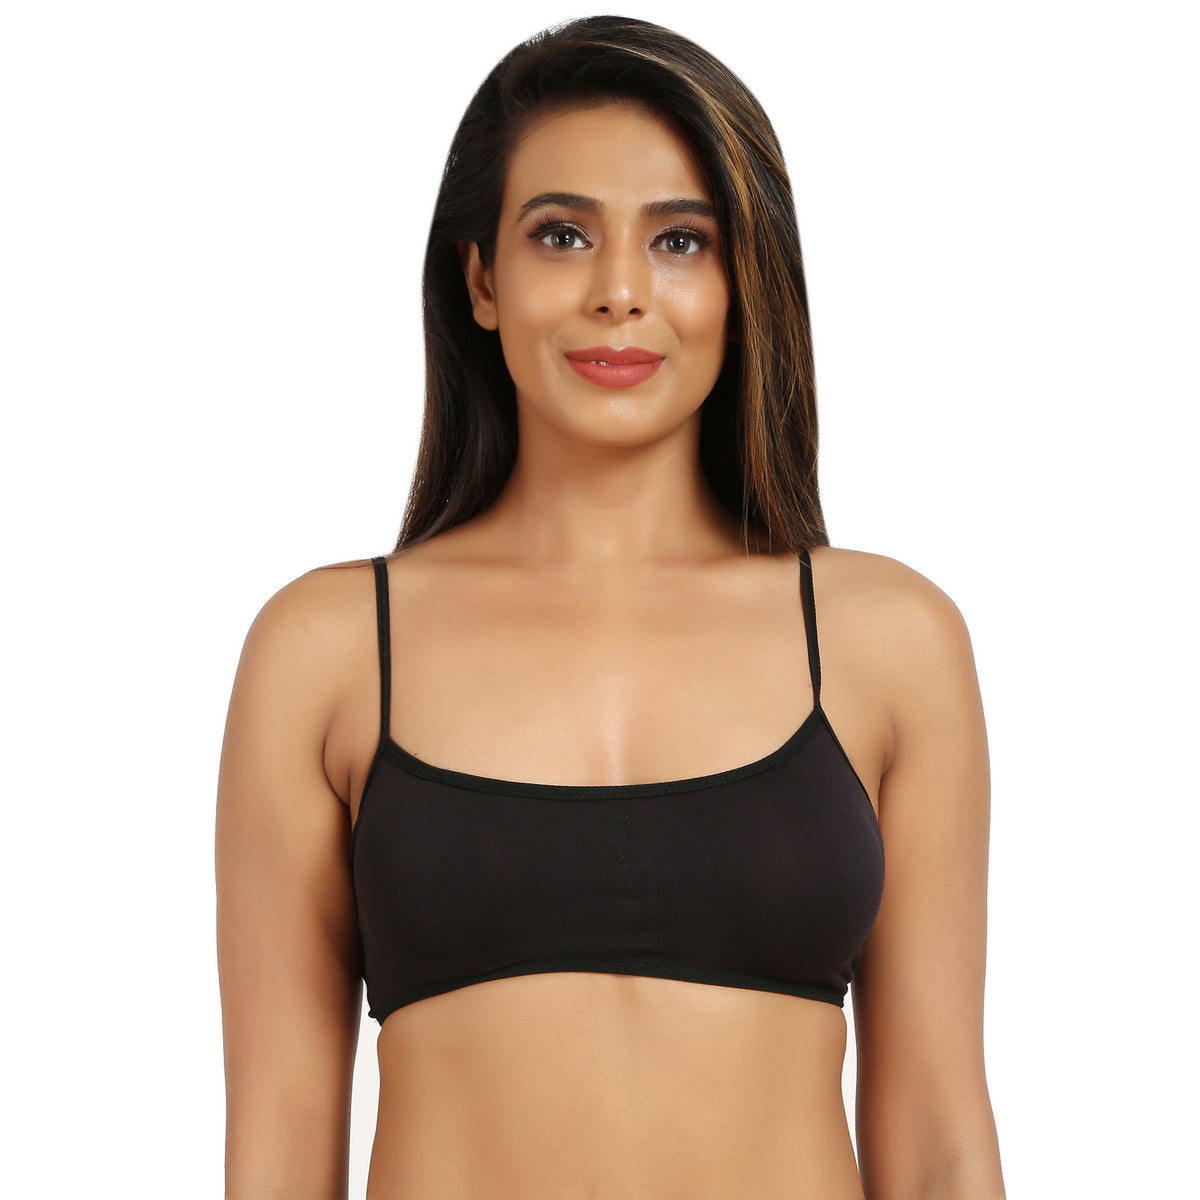 Bruchi club Women Lightly Padded sports Bra with 3/4th coverage-Black color